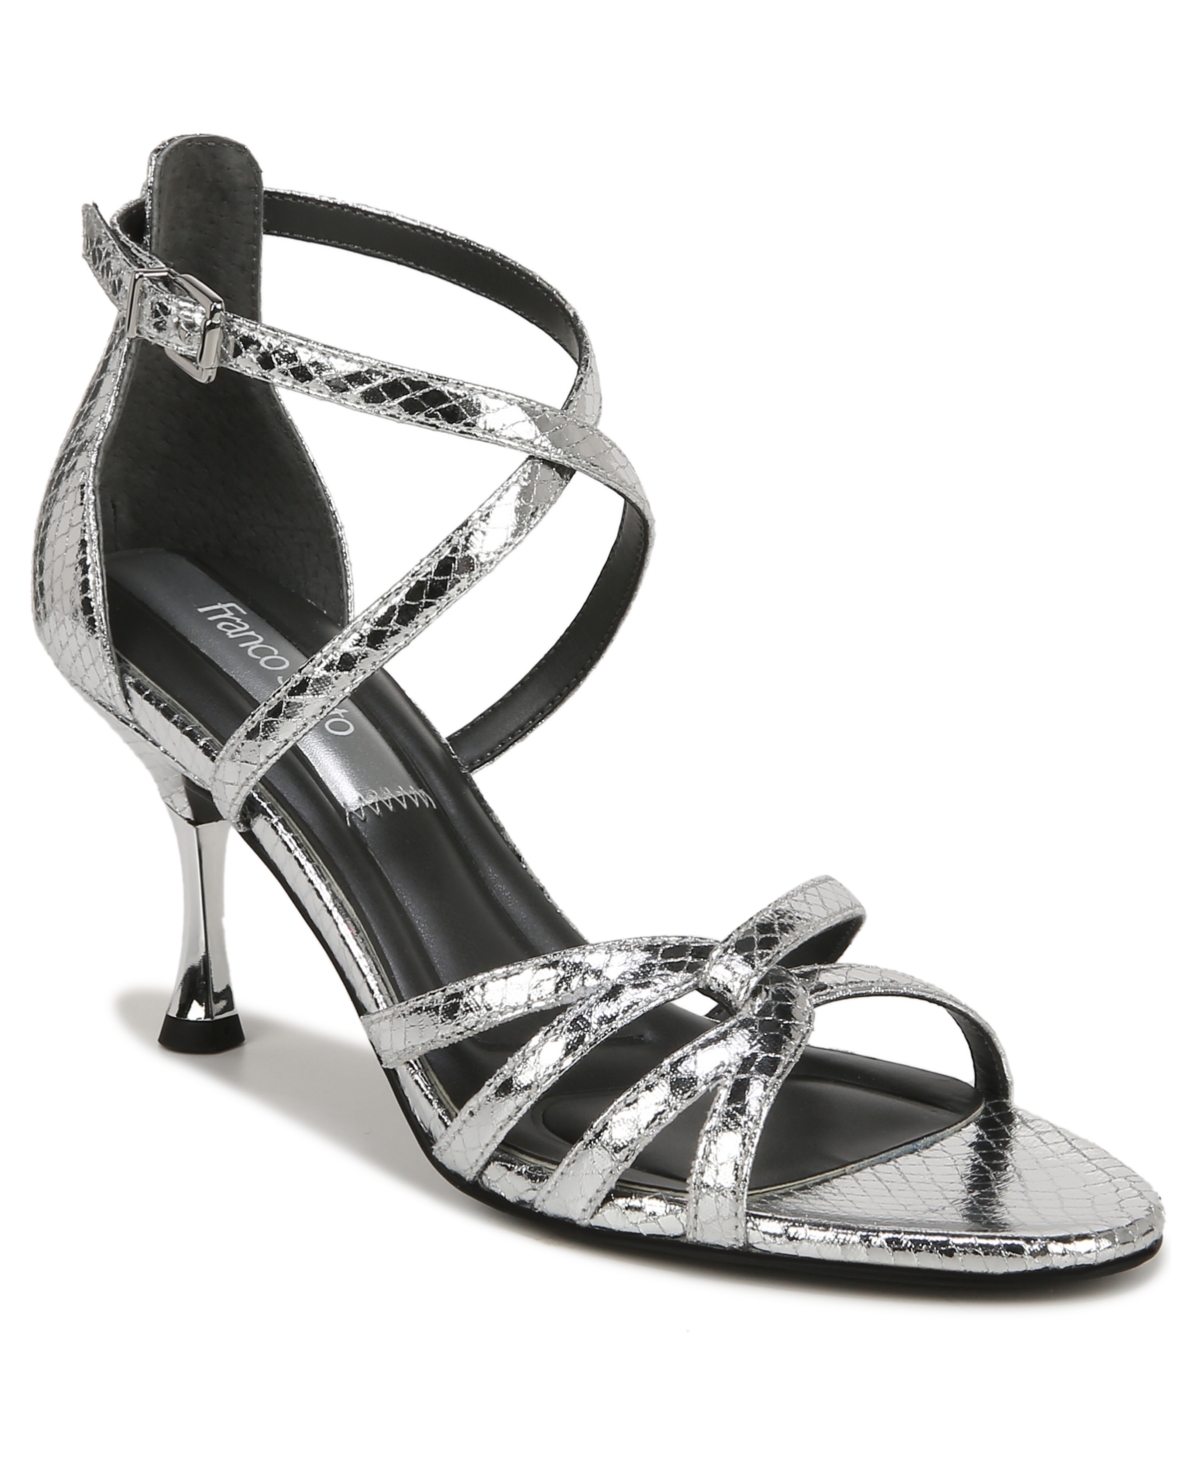 Rika Strappy Dress Sandals - Silver Snake Print Faux Leather